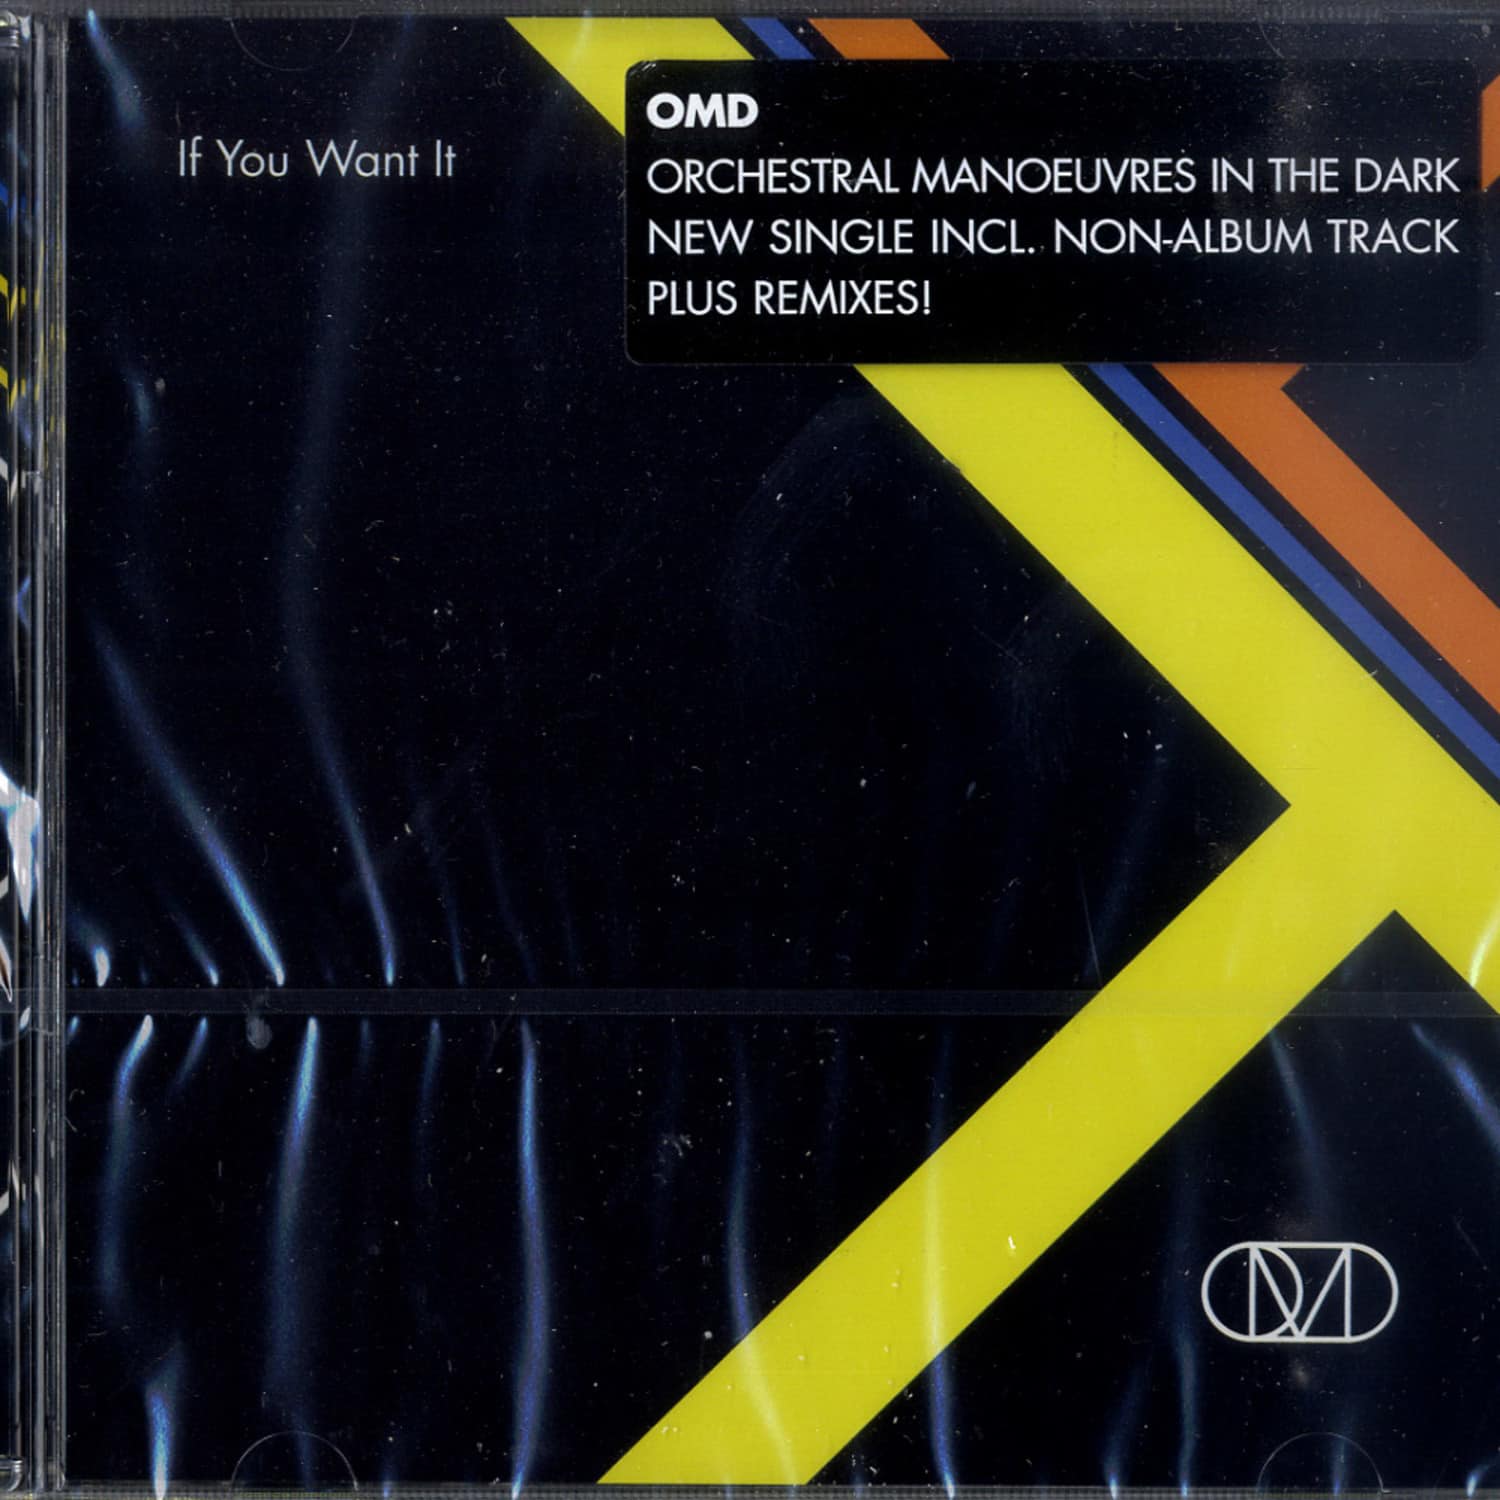 Omd  - IF YOU WANT IT 